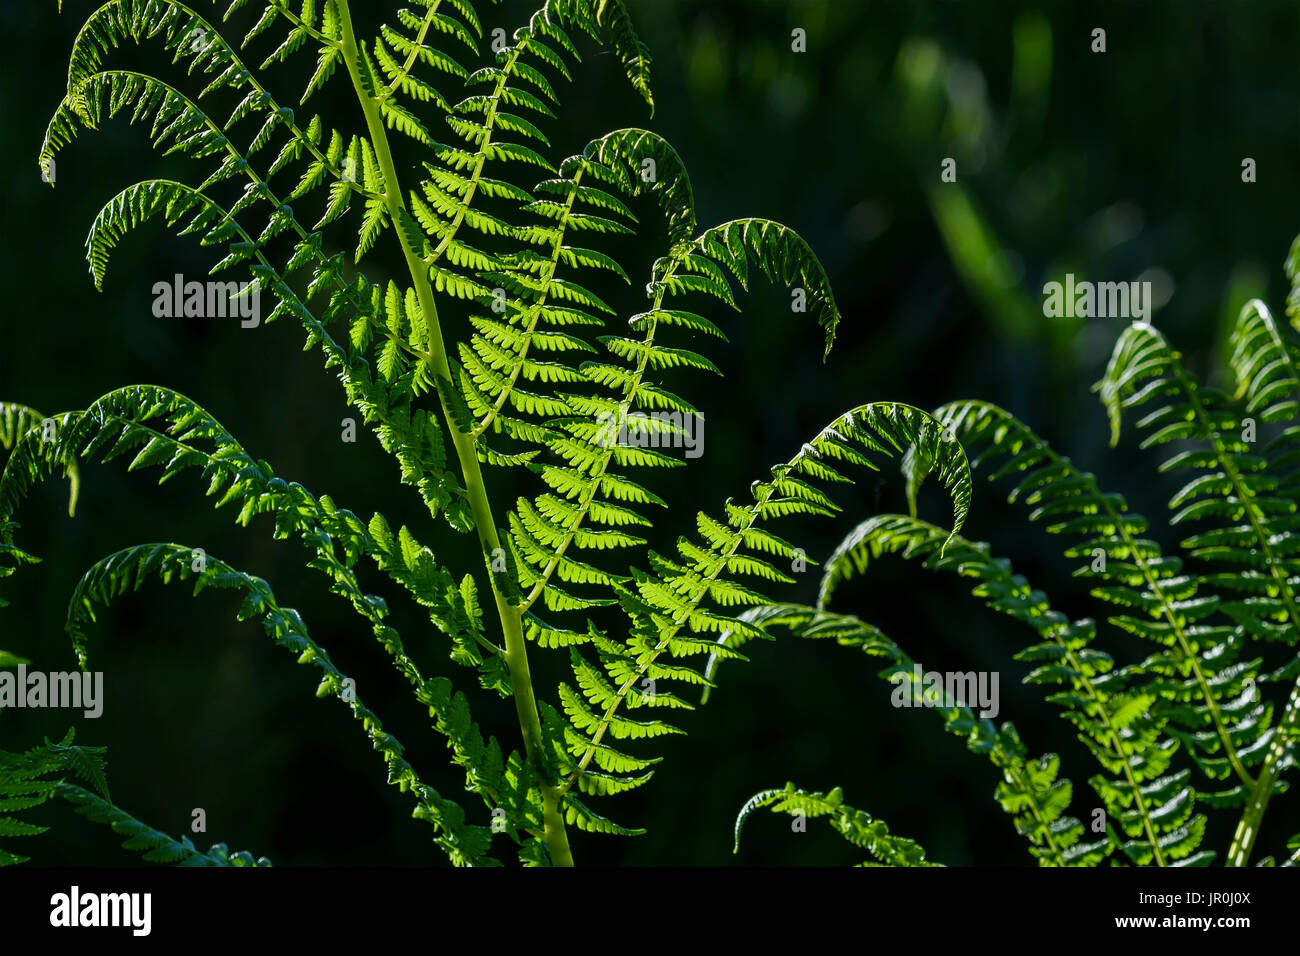 Lady Fern (Athyrium) Fronds Are Back Lit In The Forest; Astoria, Oregon, United States Of America Stock Photo